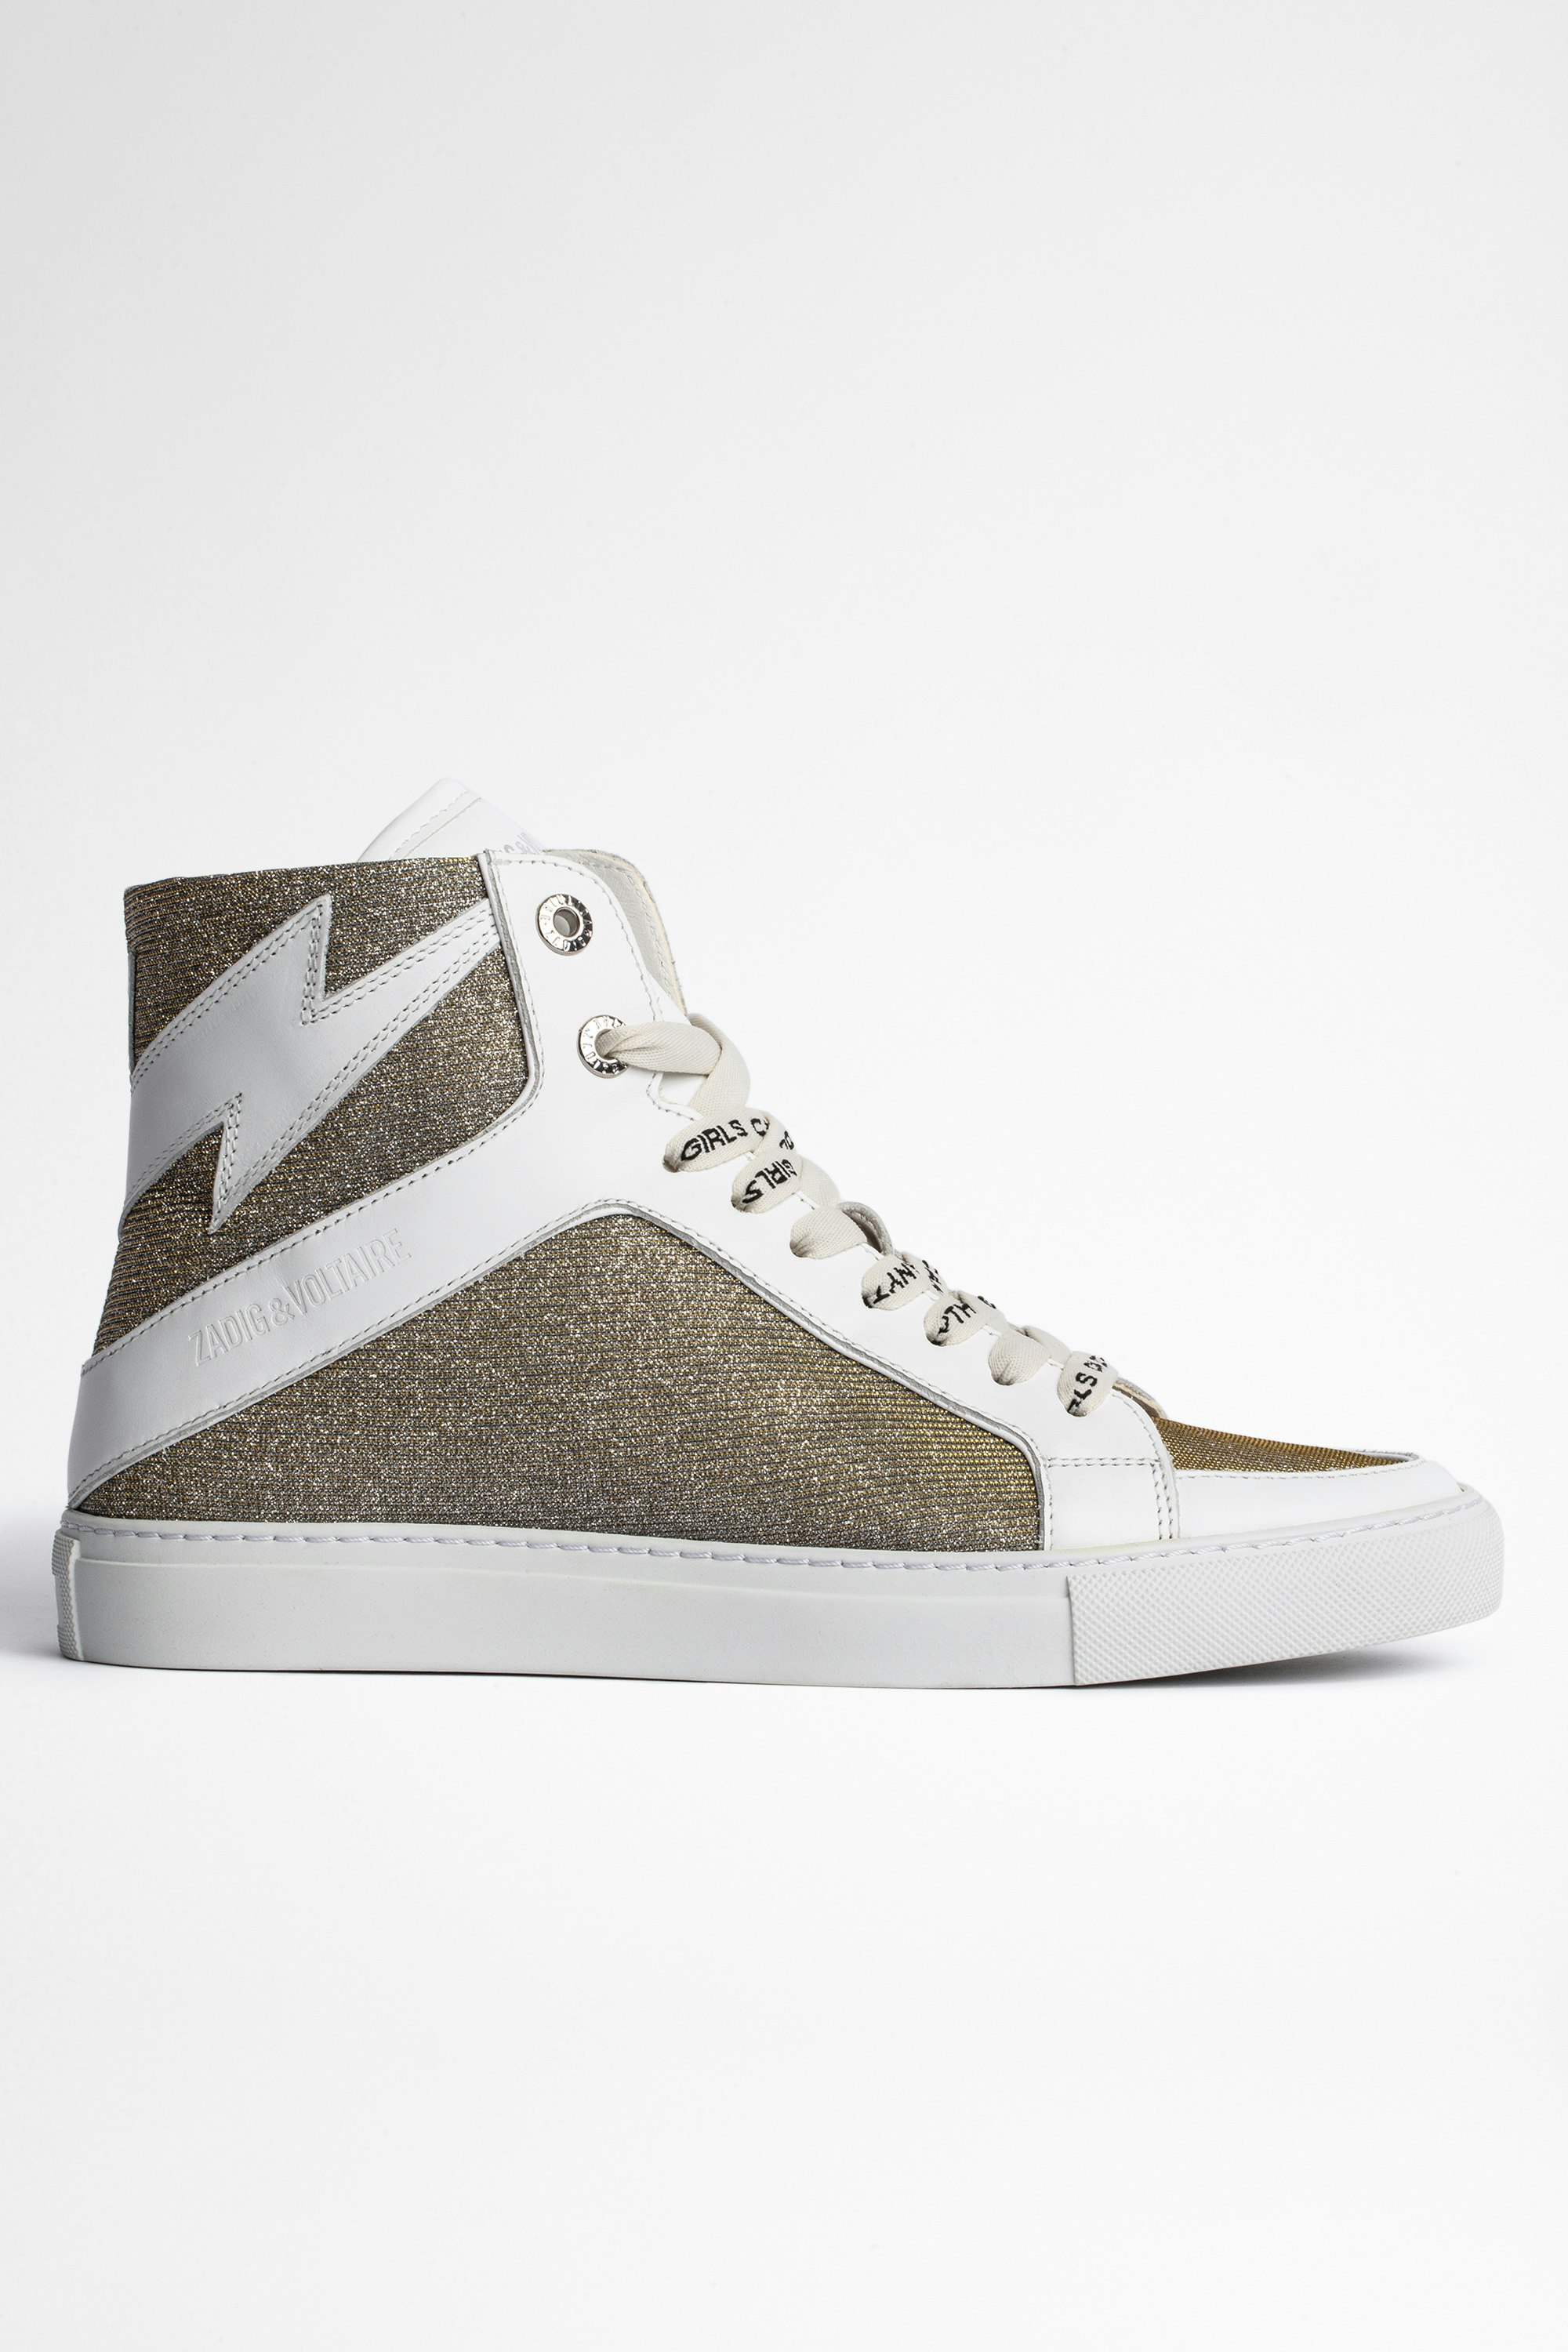 ZV1747 High Flash High-Top Trainers - Women's high-top sneakers in smooth white leather and silver glittery fabric